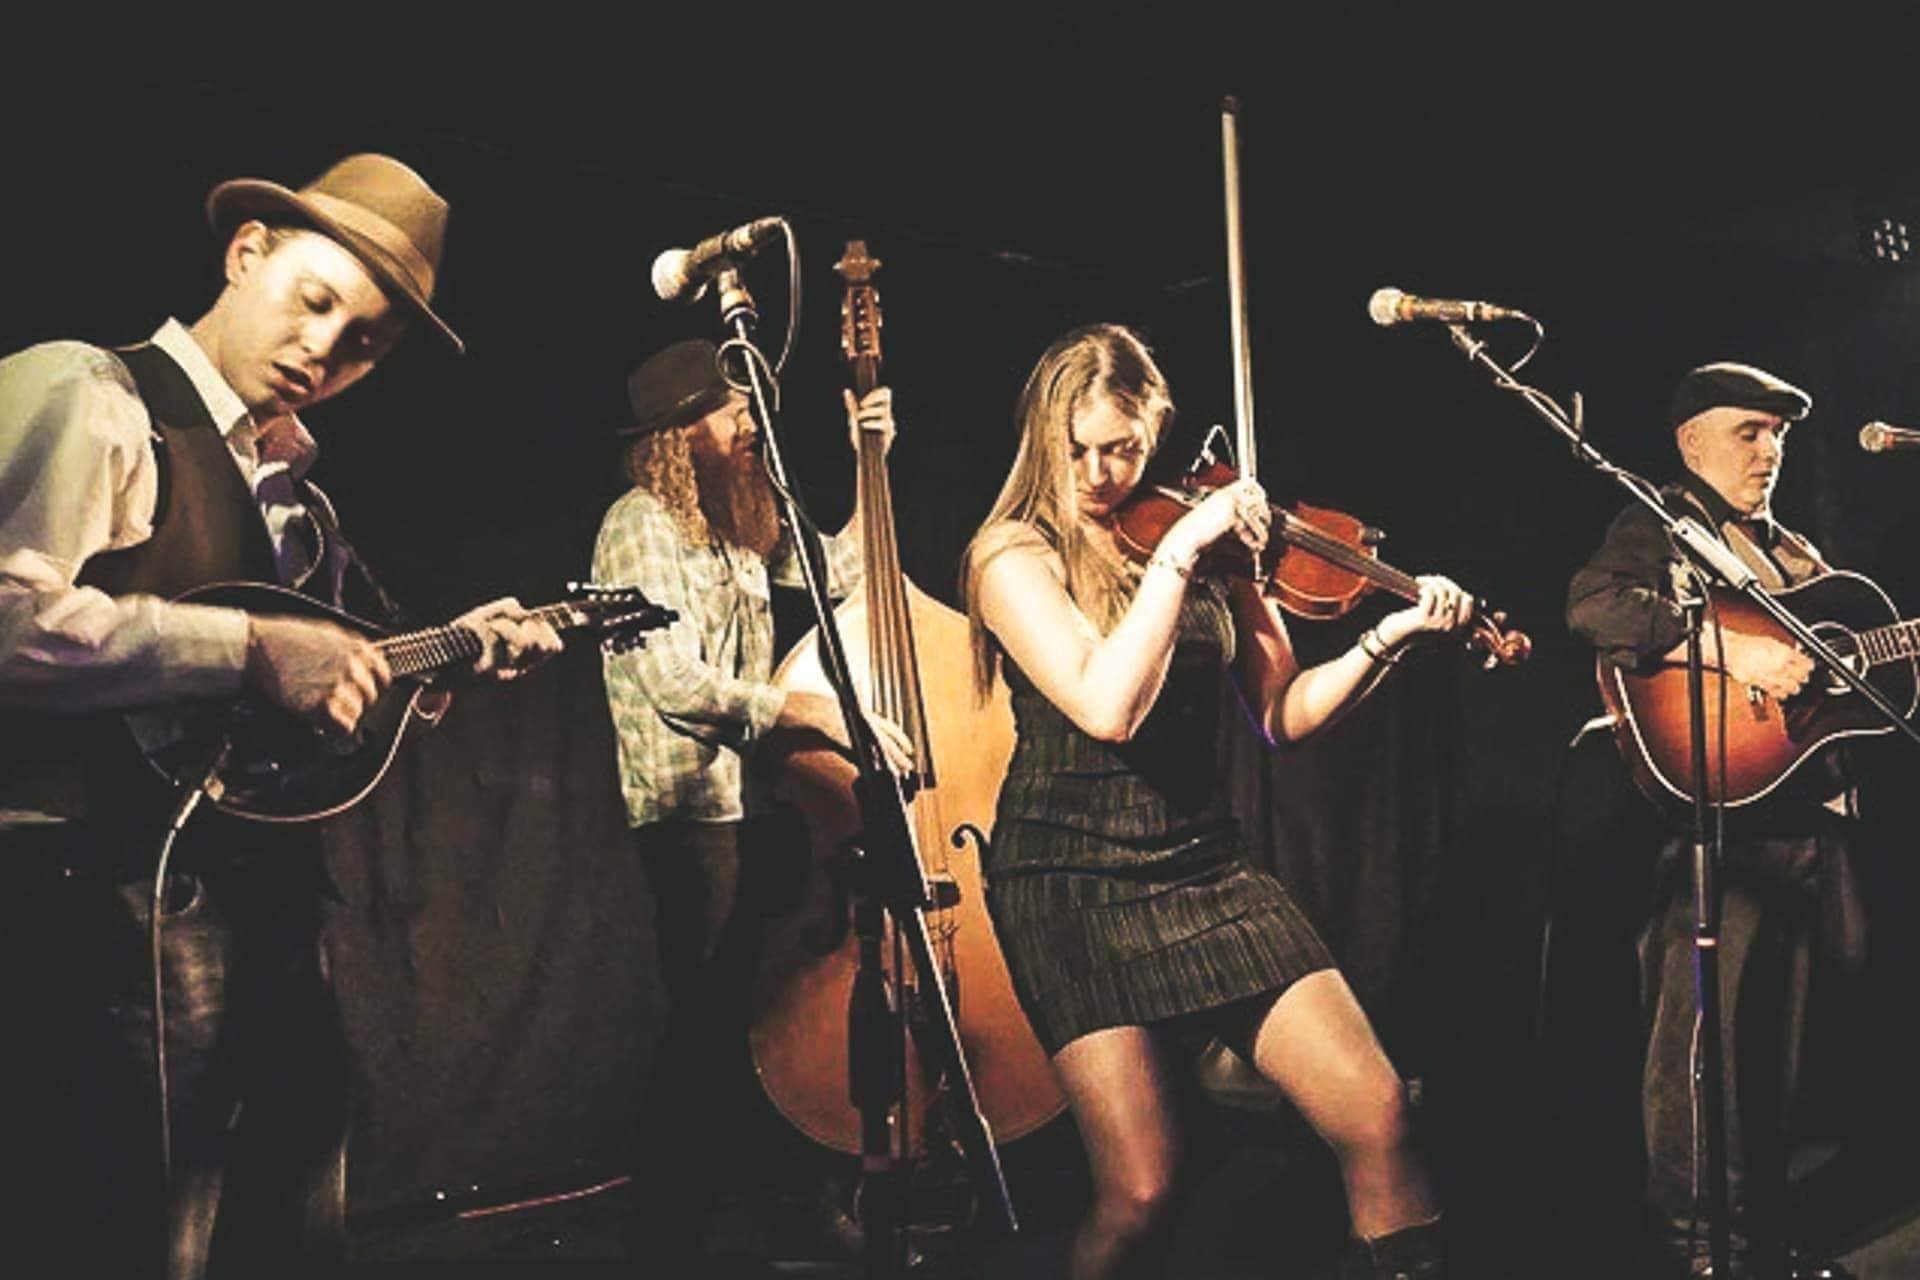 The Jakob's Ferry Straggler, led by fiddle player and vocalist, Libby Eddy, will perform in Thyme Bistro in Weston on October 7 to benefit cancer patients.